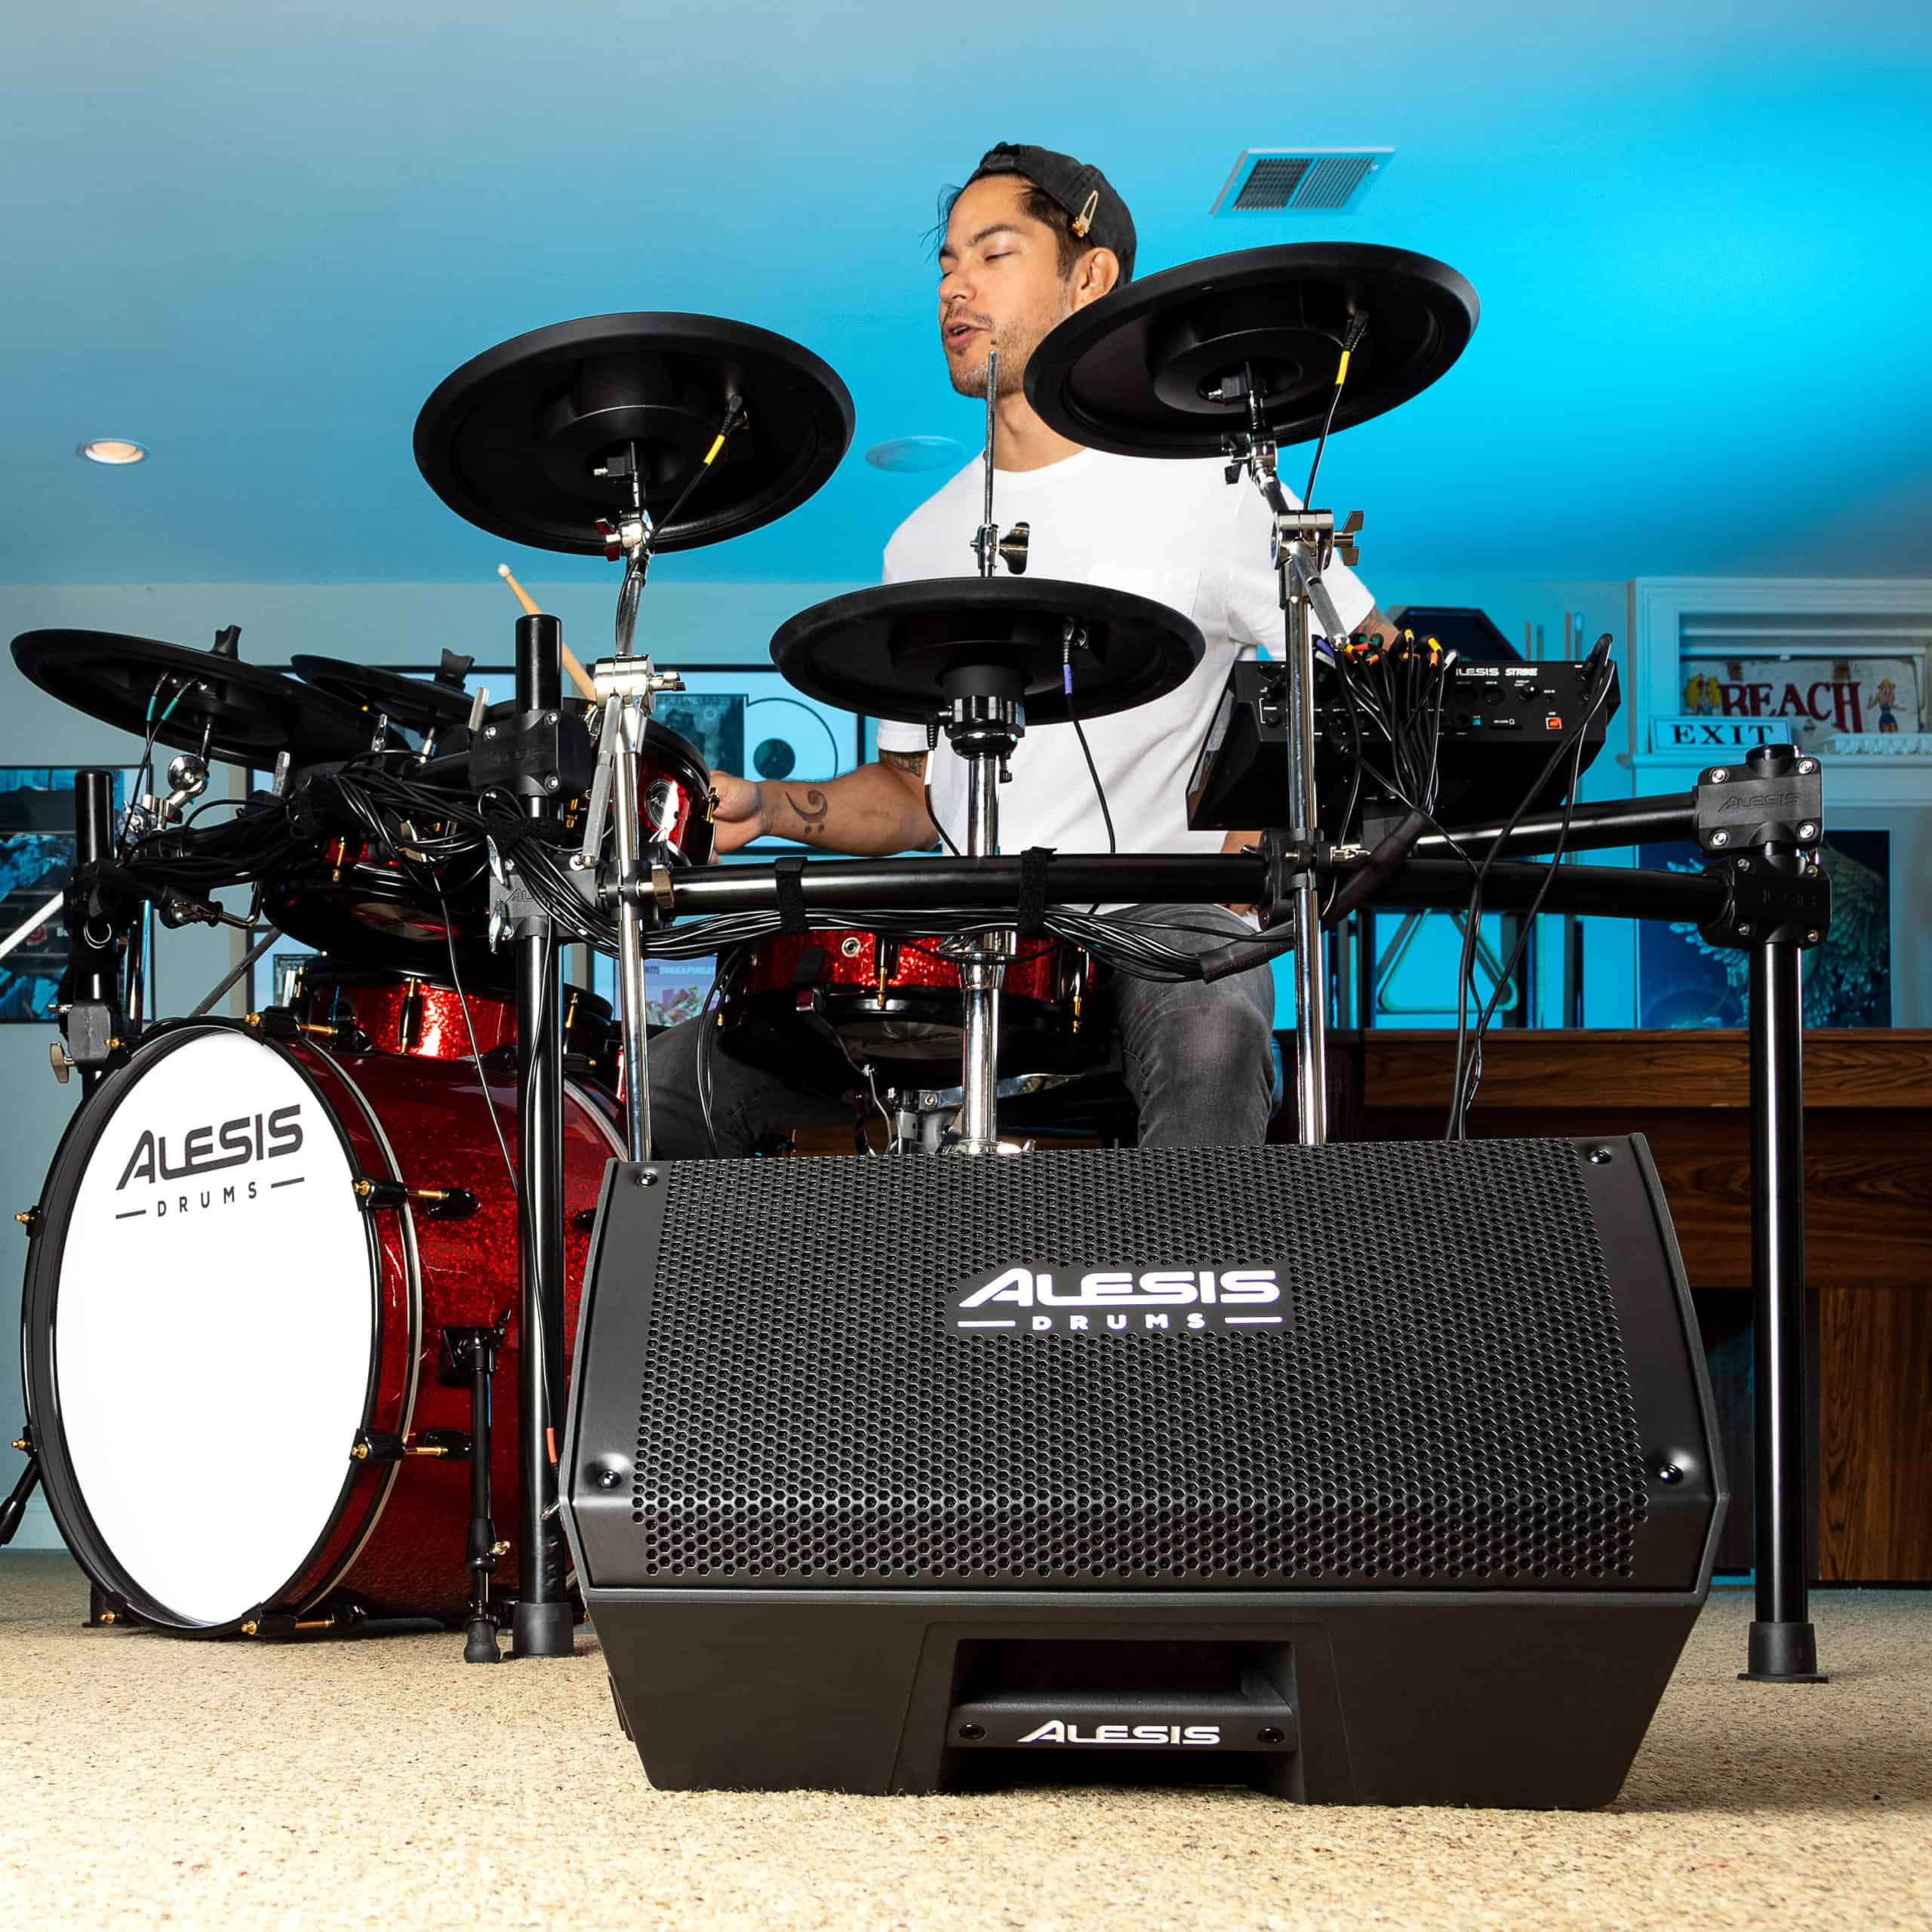 Alesis Drums’ New Strike AMP 8 a Powerful And Portable Practice Solution for Drummer